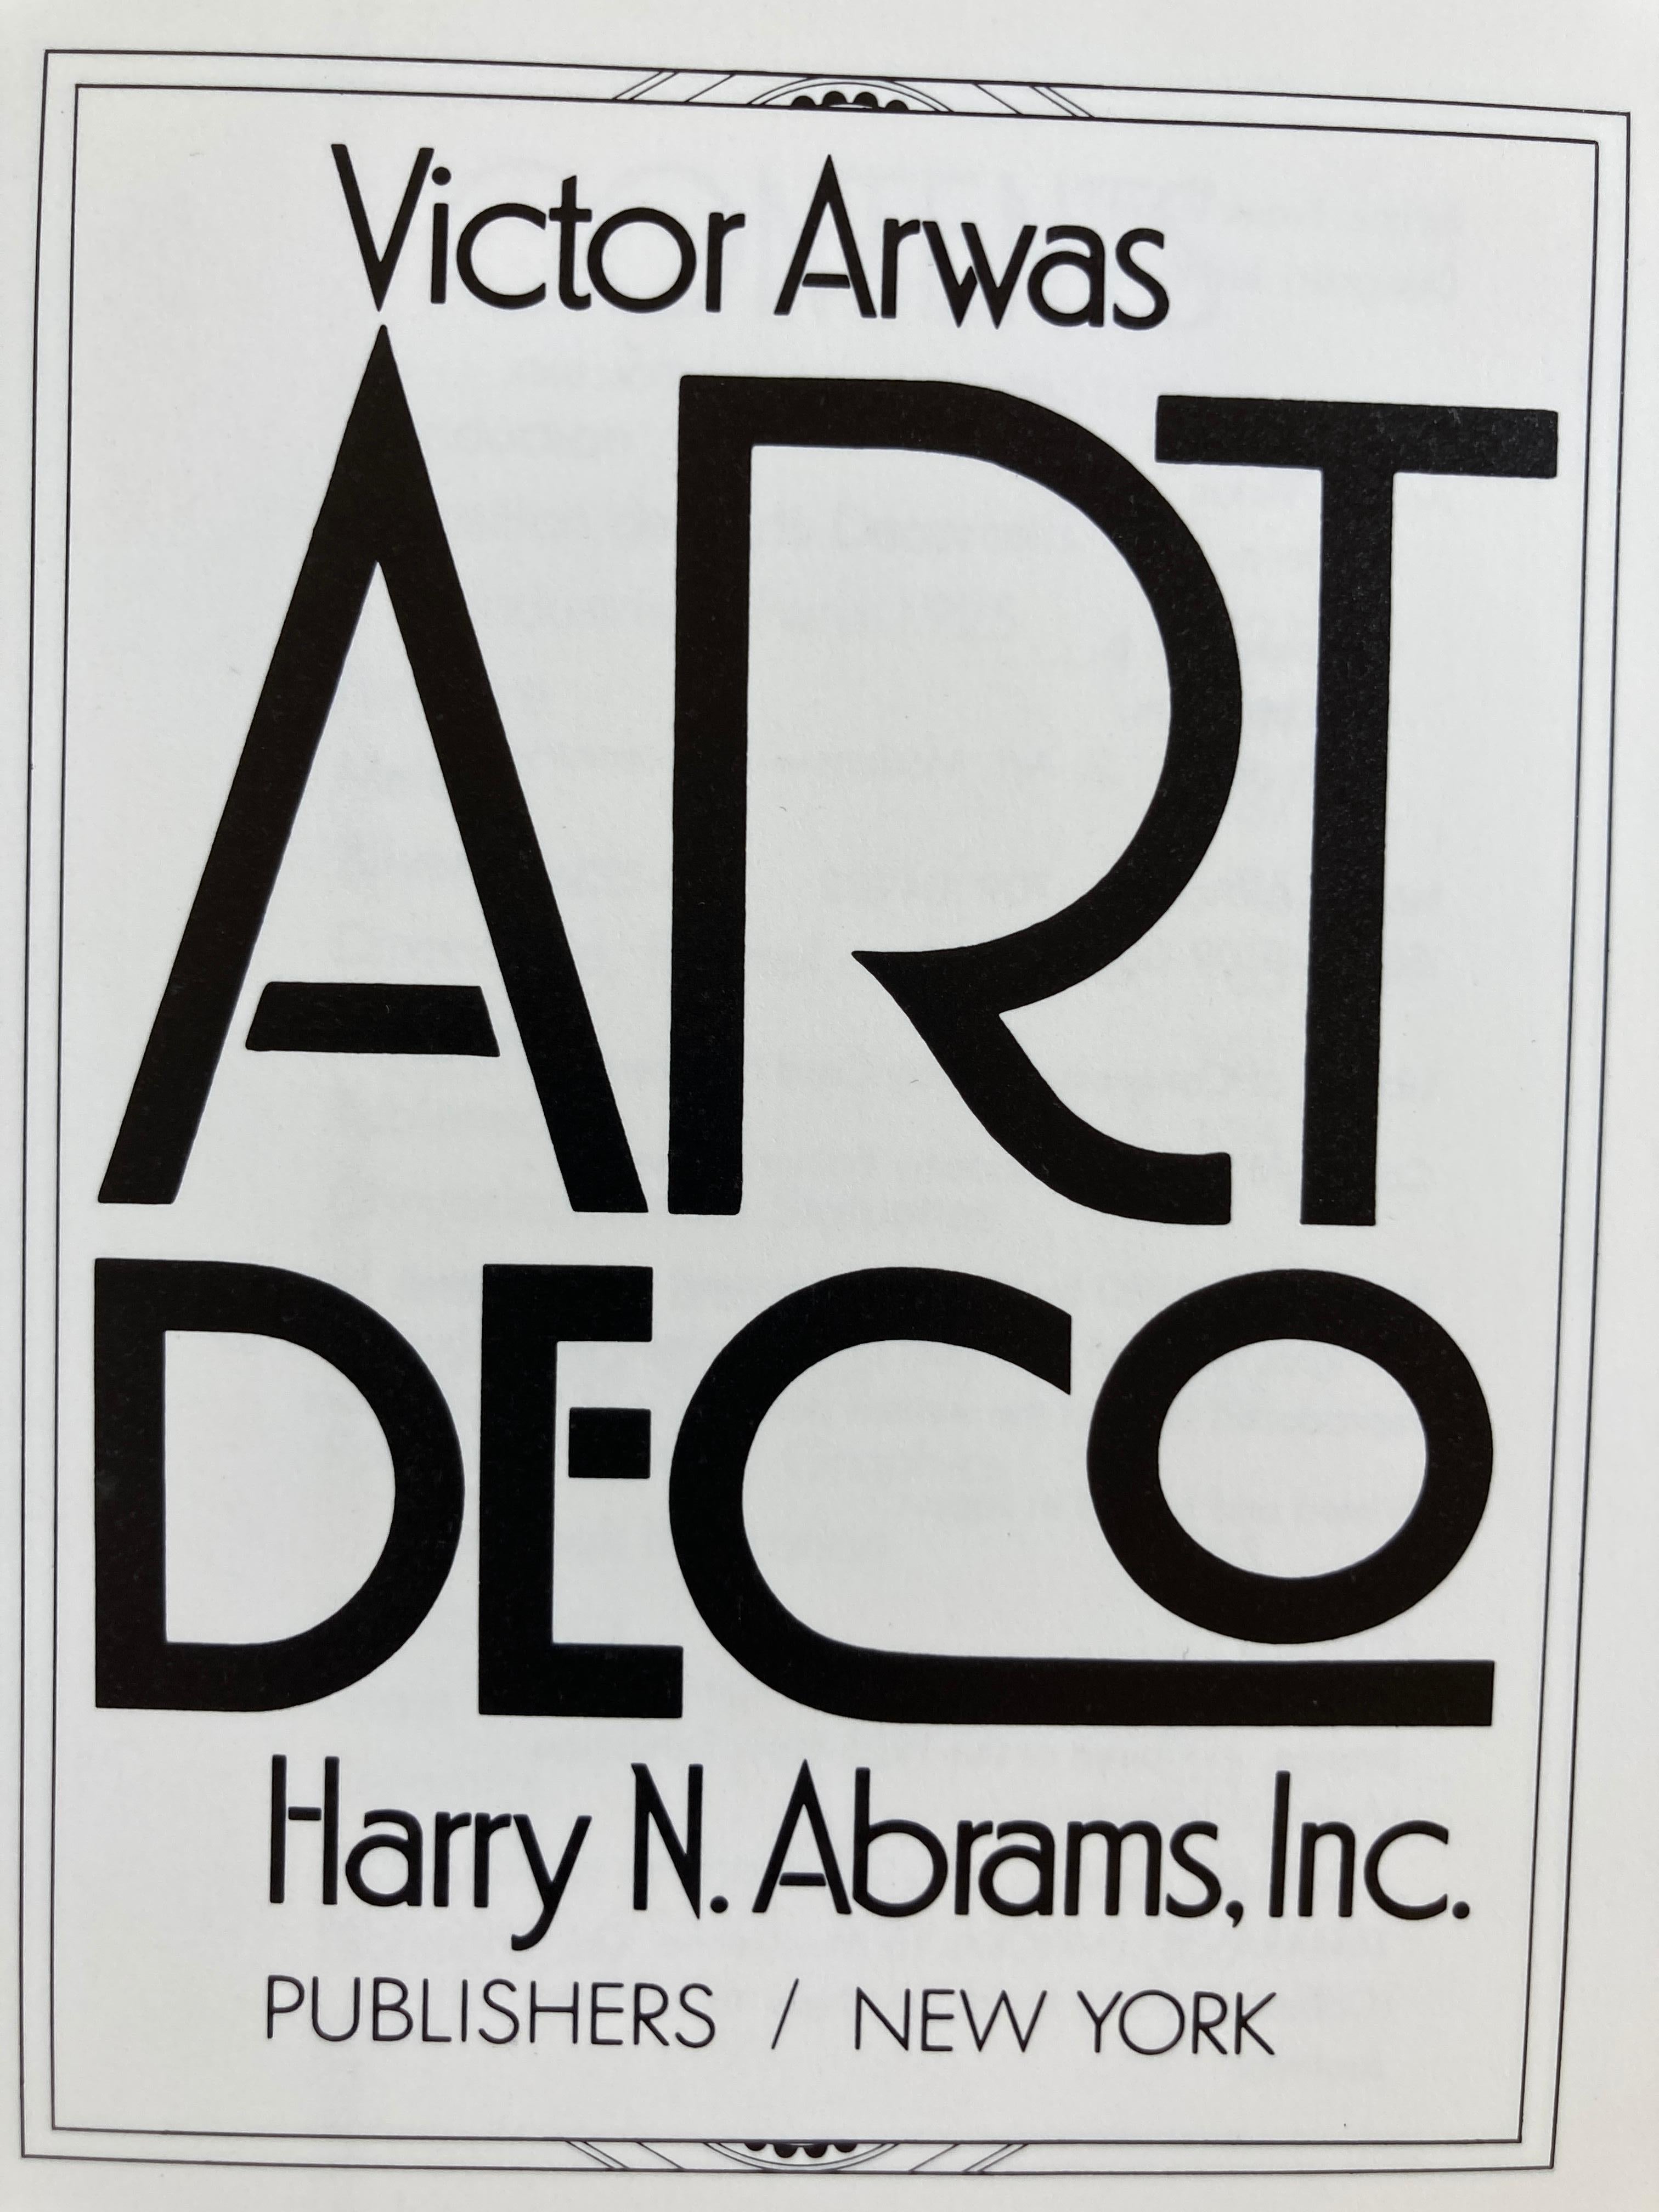 American Art Deco by Victor Arwas Coffee Table Art Book